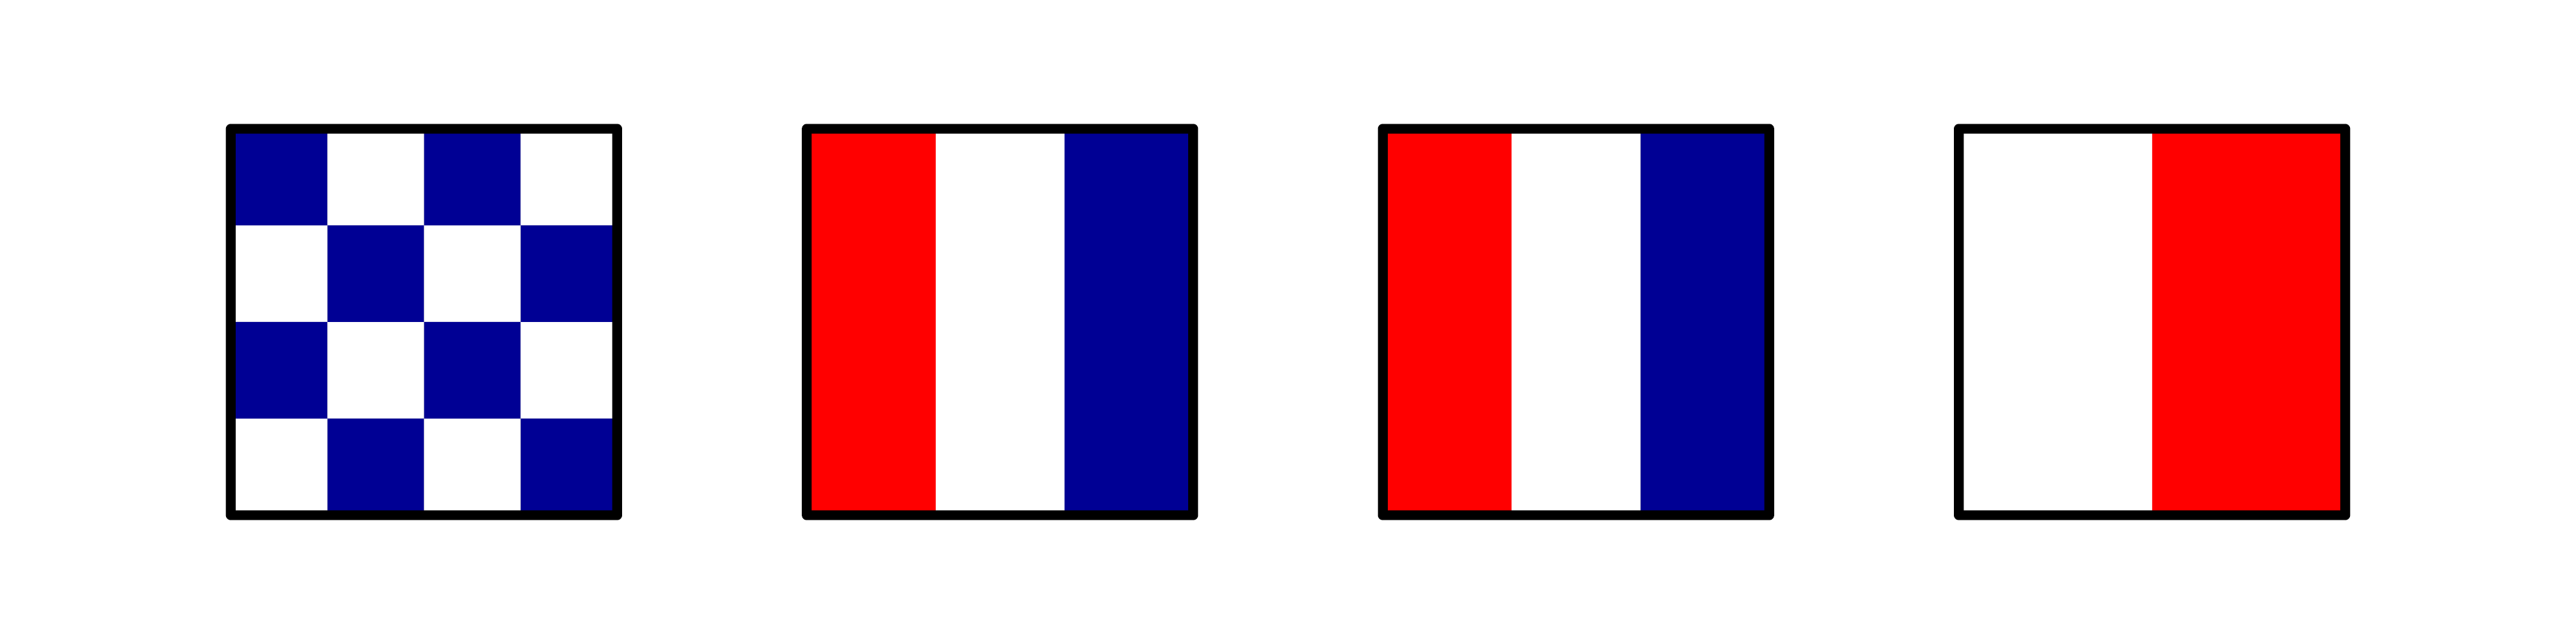 4 square flags in a row, 1 is checkered blue and white. 2 & 3 have red white and blue vertical bars, and 4 has half white and half red vertical rectangles.